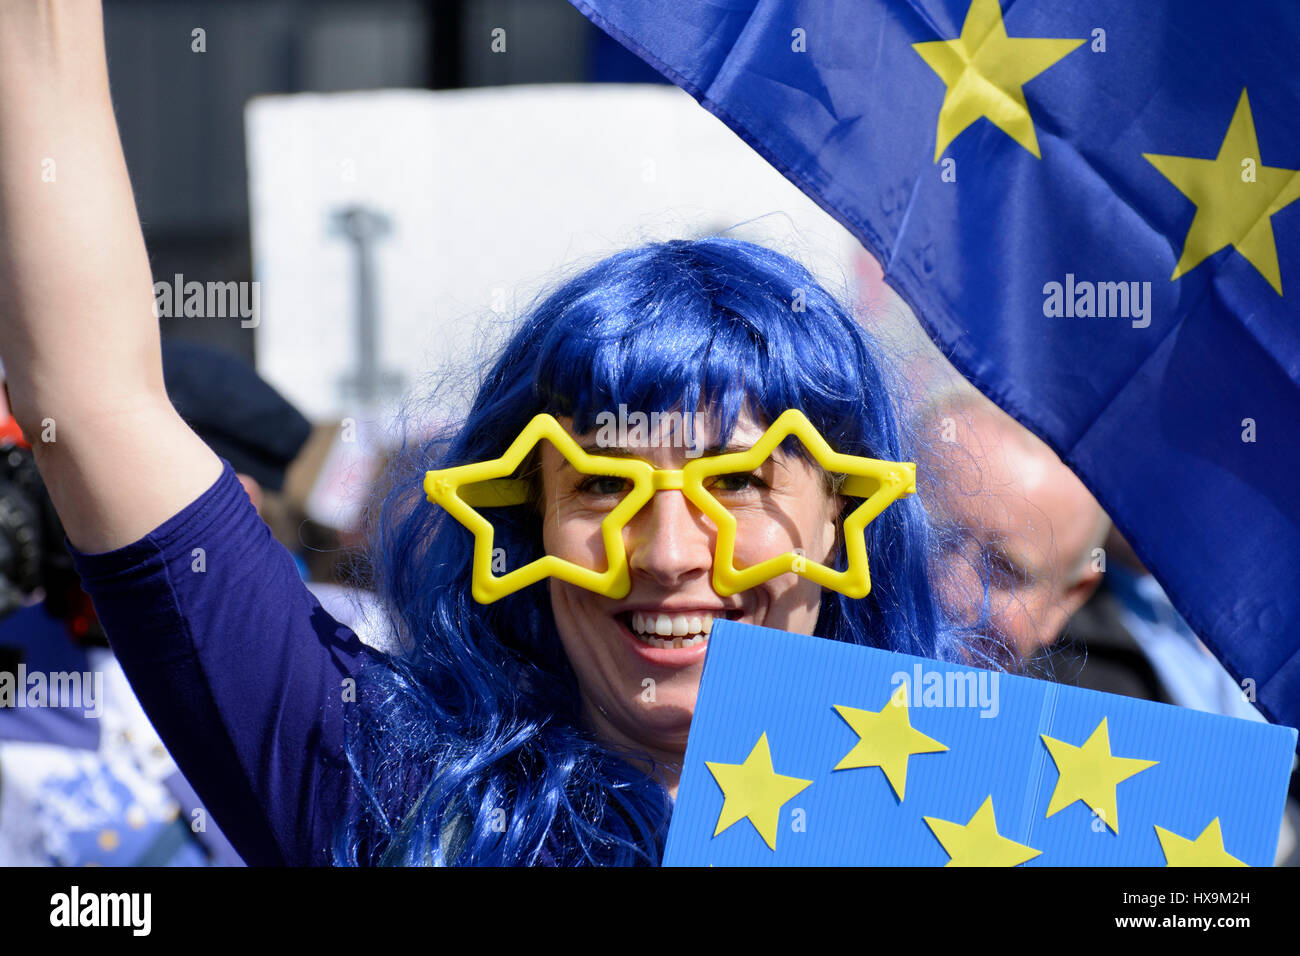 London, UK. 25th Mar 2017. Portrait of a smiling anti-Brexit protester wearing yellow EU stars as glasses, blue wig and waving European Union flag at the Unite for Europe march in London. Thousands of protesters marched through central London protesting against Brexit during the 60th EU anniversary, just before the Theresa May triggered Article 50. Credit: ZEN - Zaneta Razaite/Alamy Live News Stock Photo